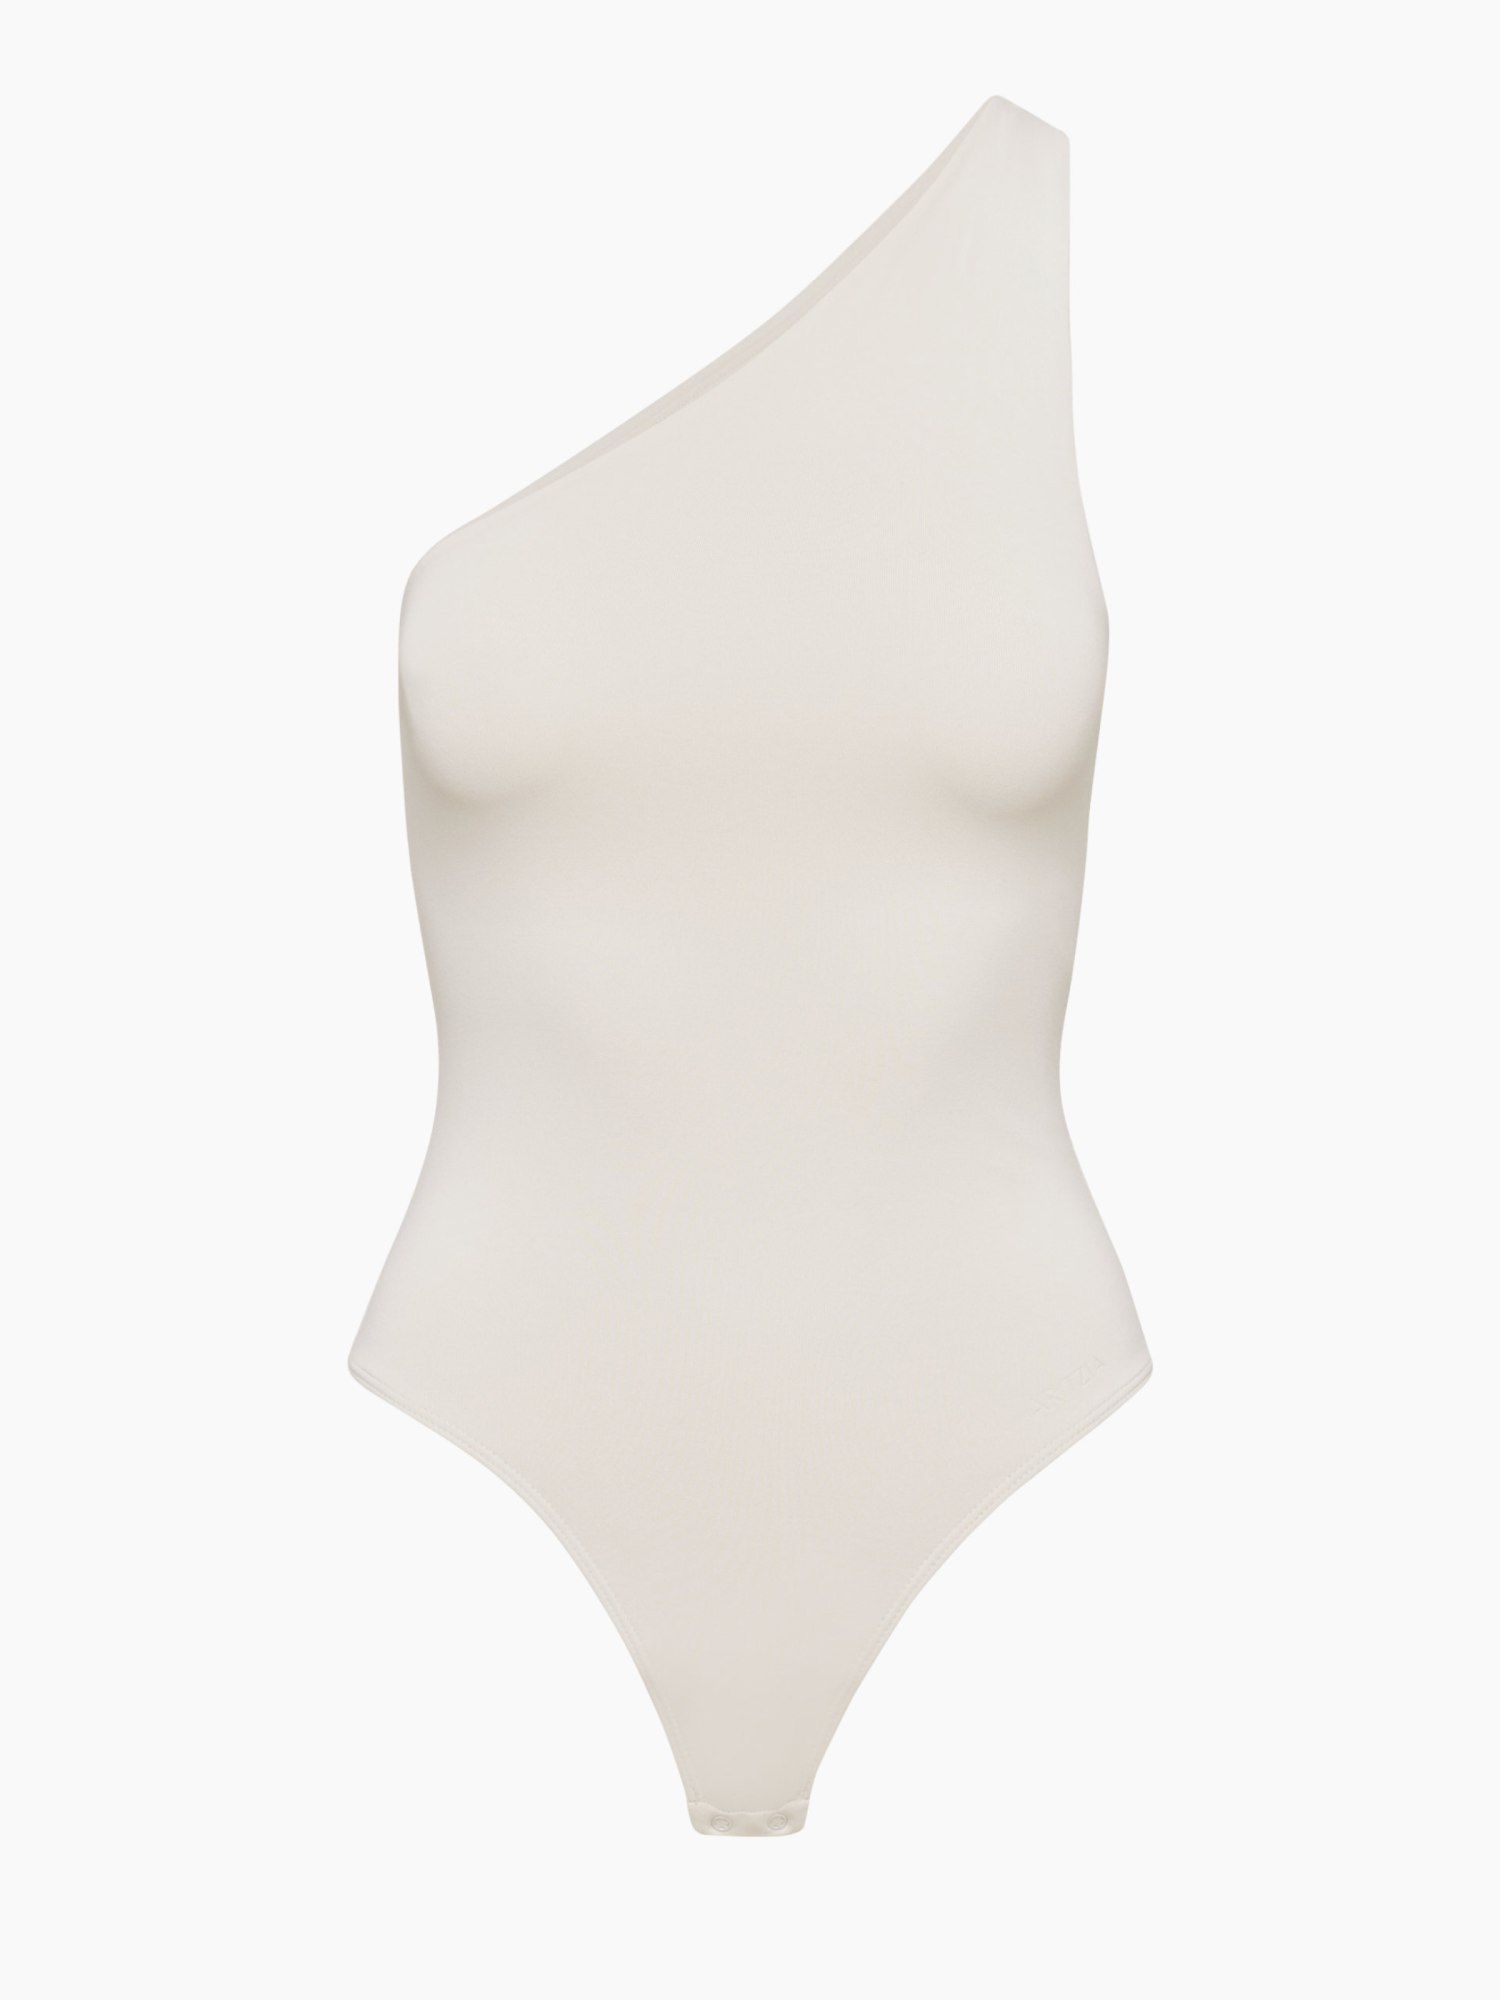 New Contour Does Things | Aritzia INTL